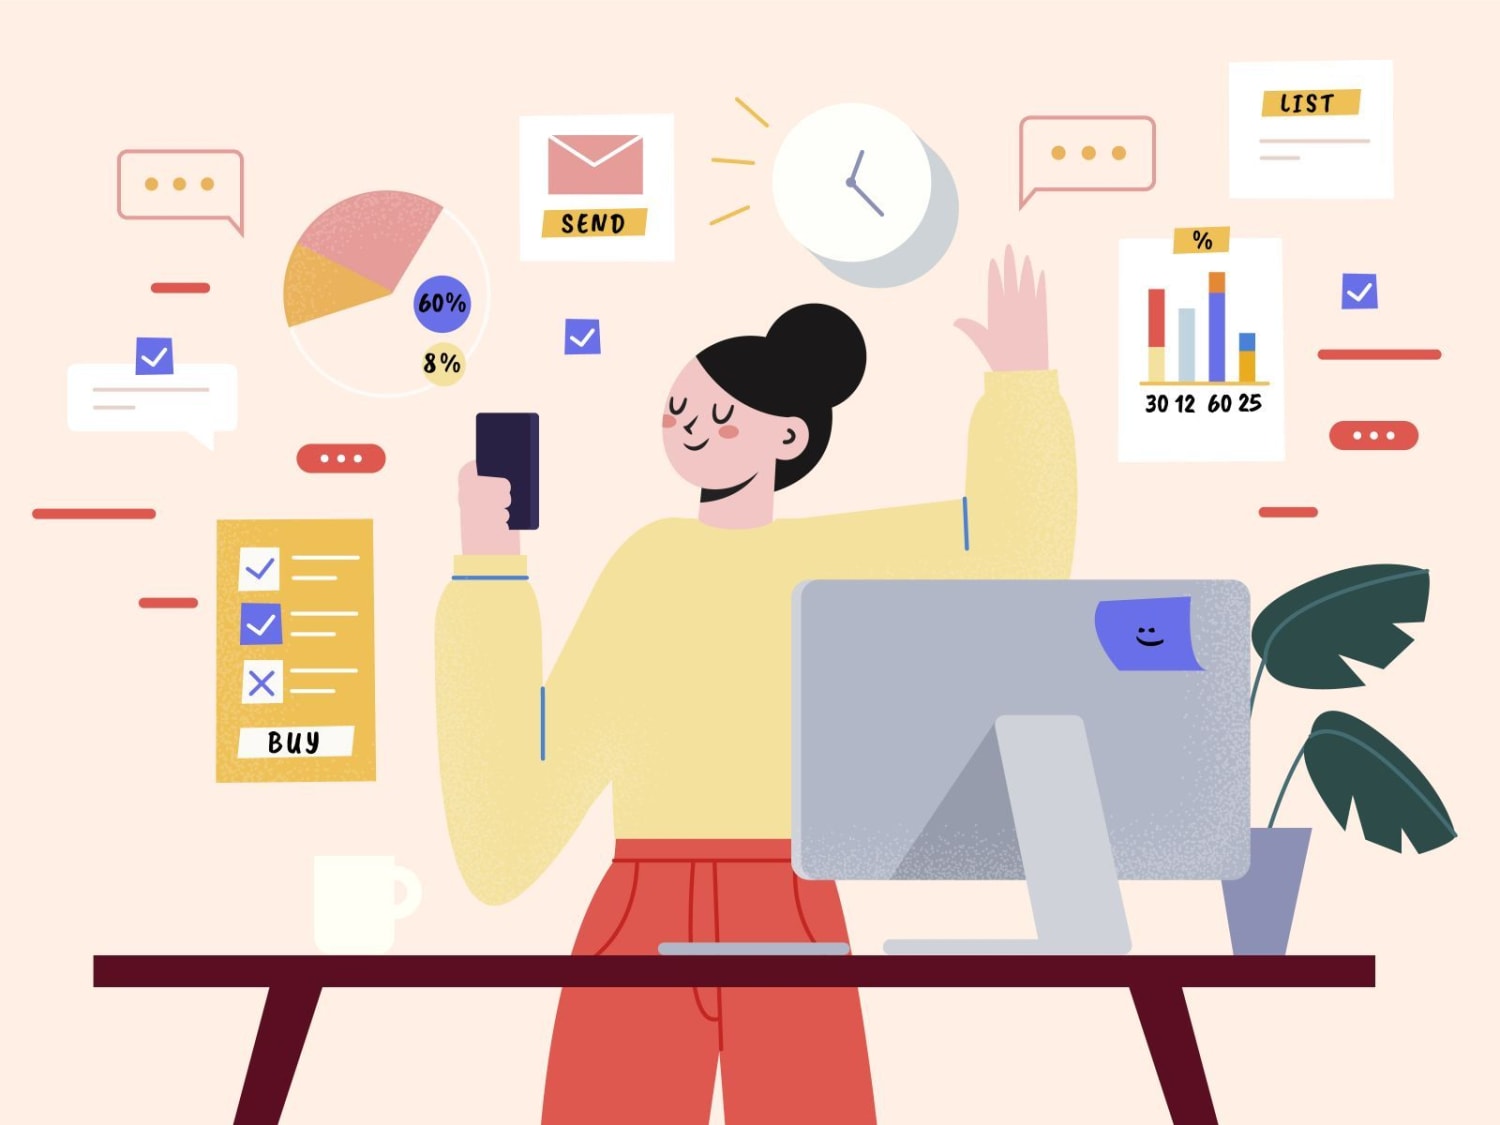 Turns out, the most successful freelancers have a few things in common that set them apart from the rest. Head over to the blog to learn 10 powerful habits every freelance designer should hone —